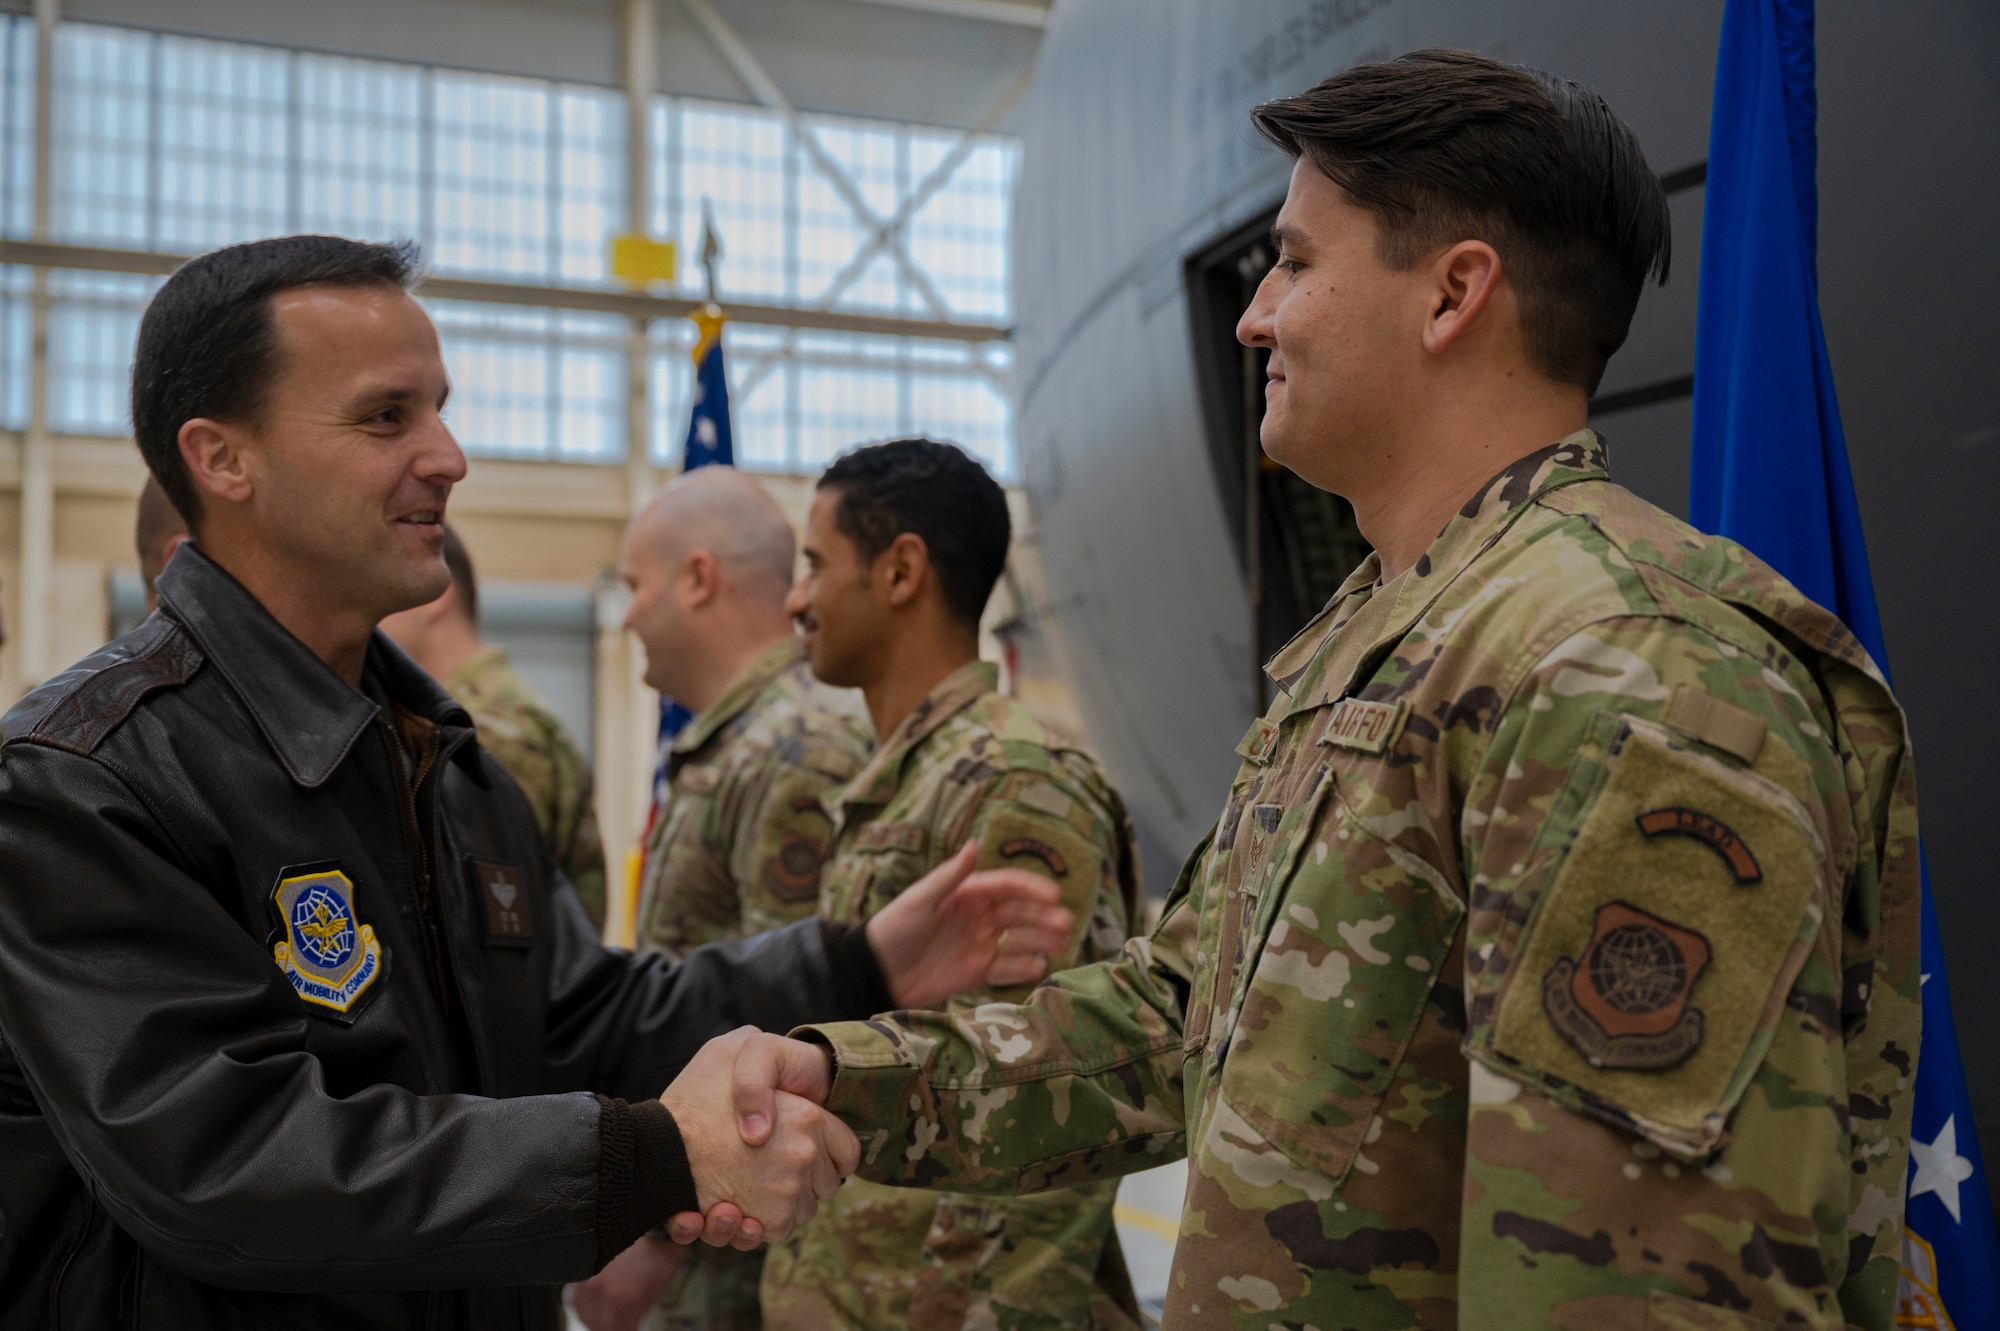 Col. Steven Wick, 317th Airlift Wing vice commander, left, shakes hands with Staff Sgt. Seth Crawford, 317th Maintenance Group Lethal Expeditionary Airman Development graduate, following the first LEAD graduation at Dyess Air Force Base, Texas, Dec. 16, 2022. LEAD is a rigorous, locally developed course designed to create a more specialized, ready force that is better trained and equipped to support ACE objectives. LEAD provides added logistics capabilities in support of forward operations and does so with a significantly reduced footprint. (U.S. Air Force photo by Senior Airman Colin Hollowell)